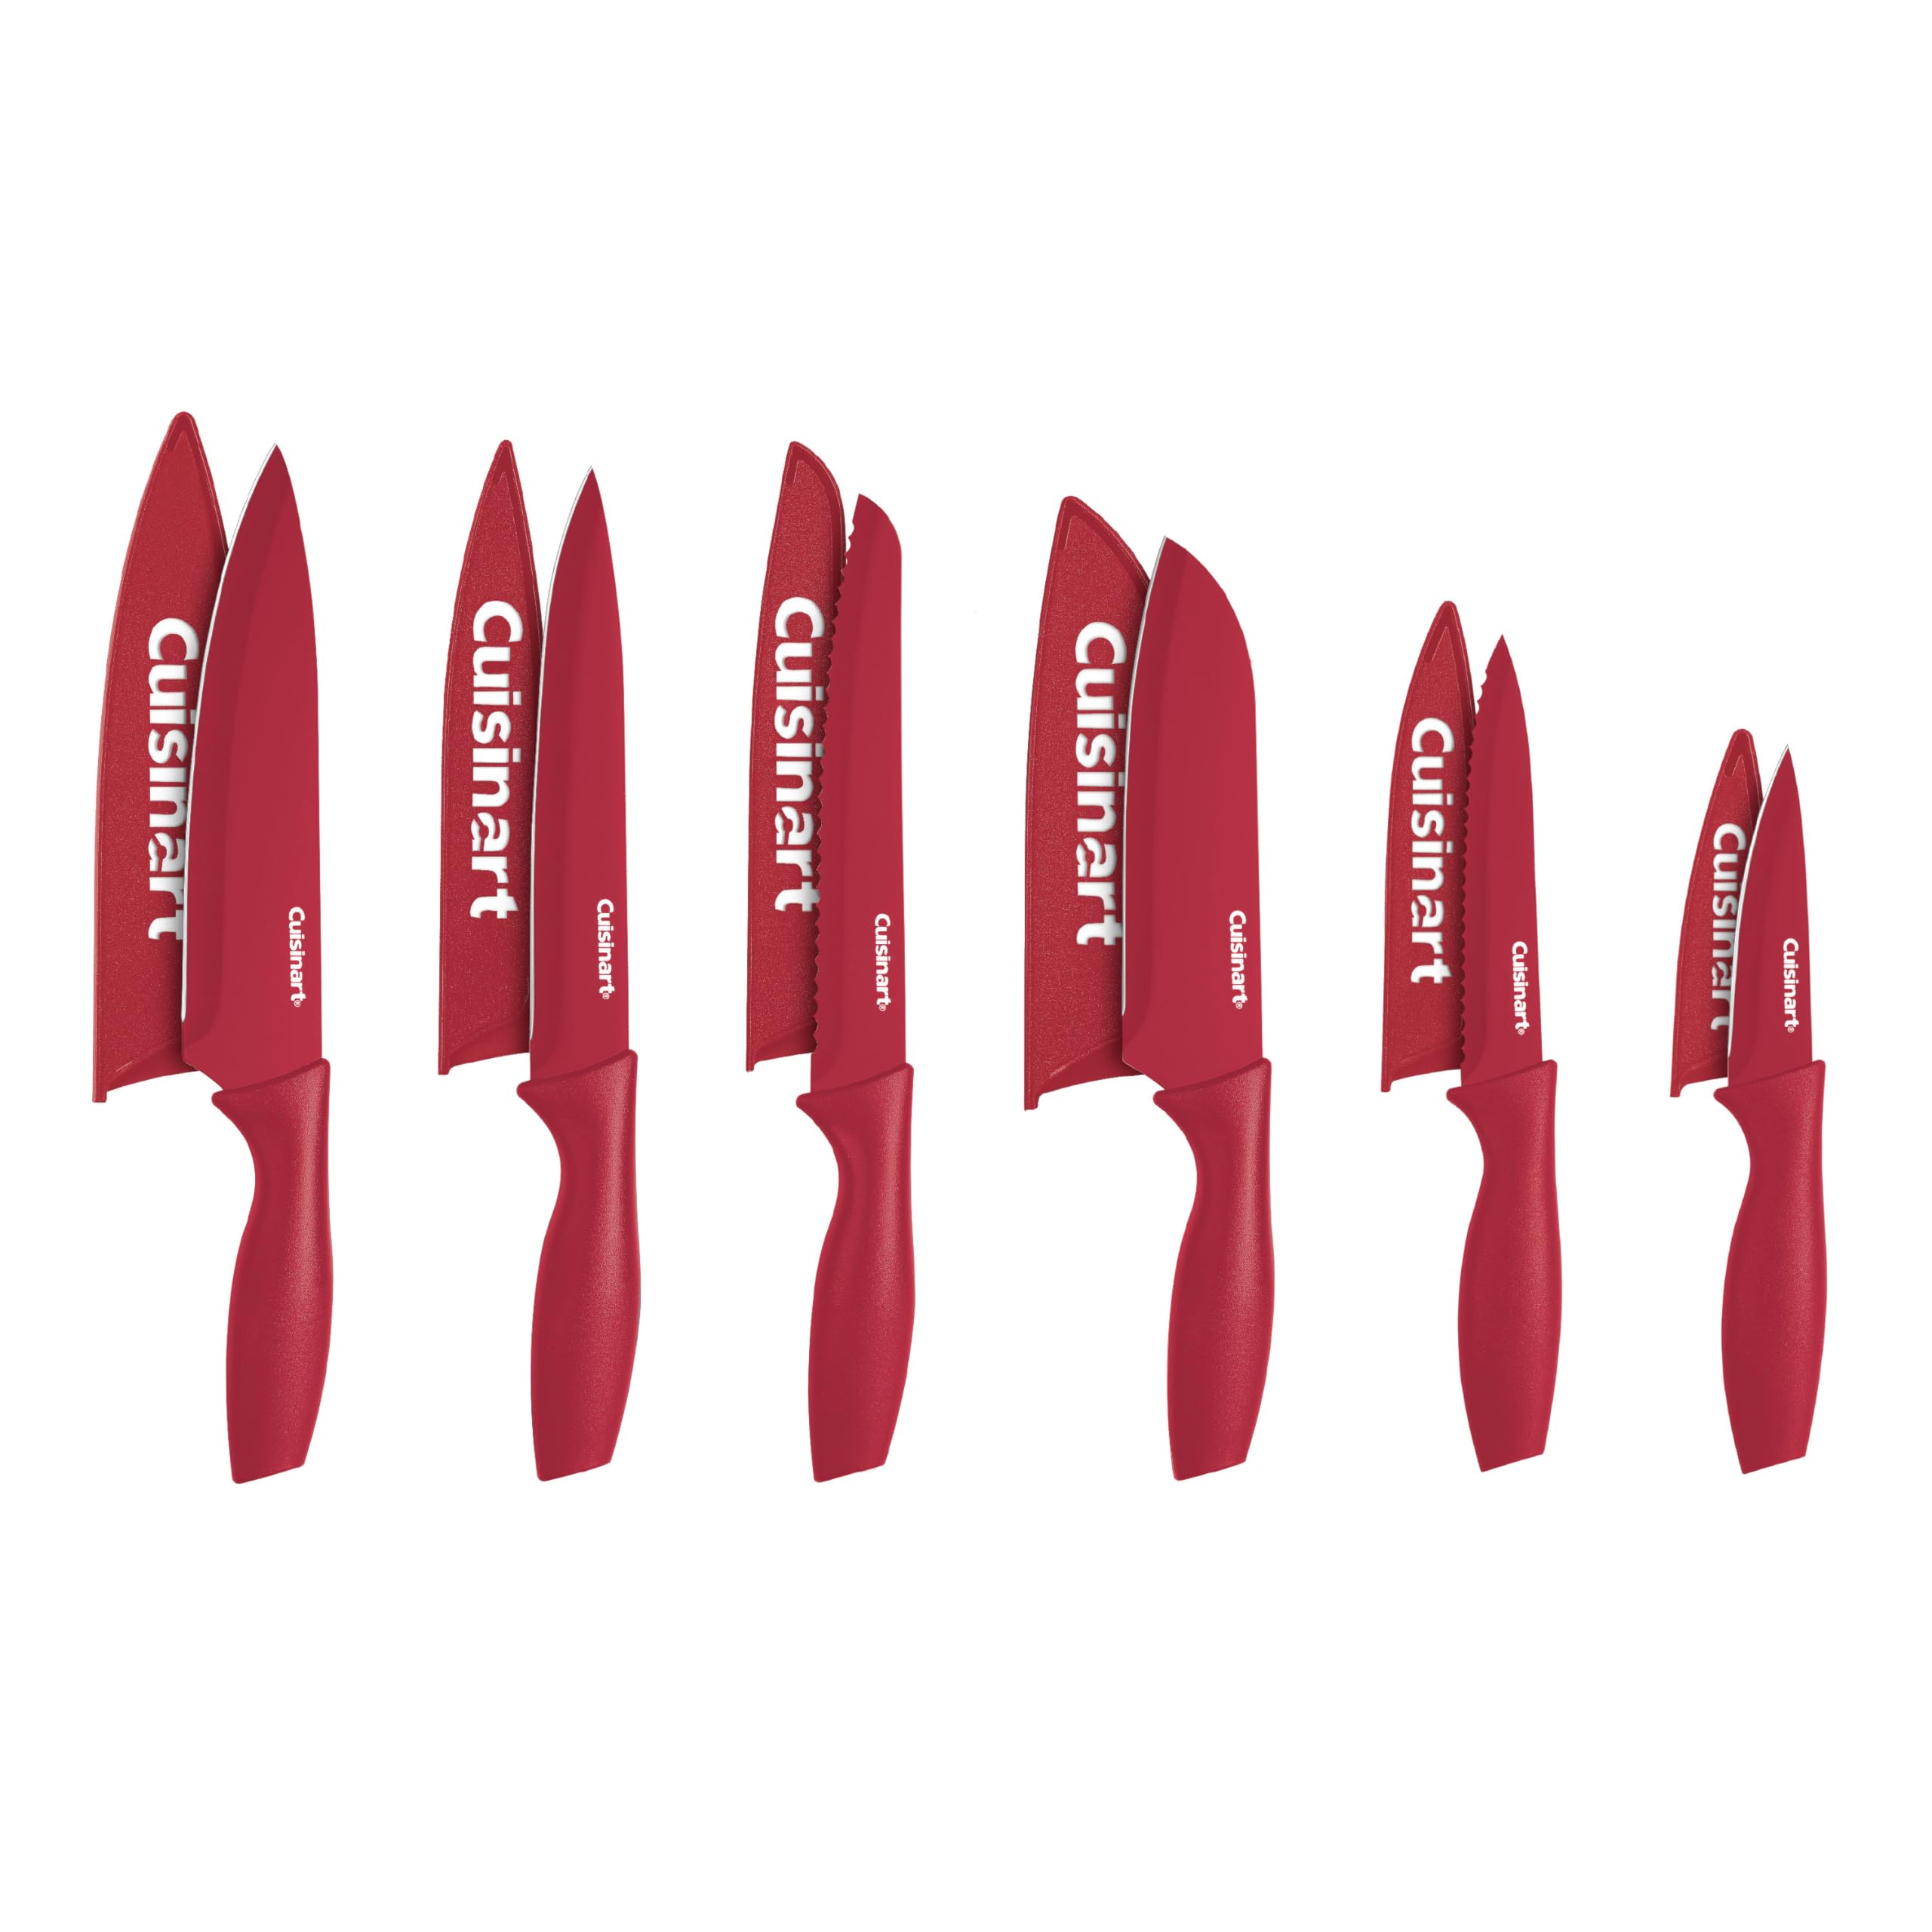 Cuisinart Knife Set, 12pc Cermaic Knife Set with 6 Blades & 6 Blade Guards, Lightweight, Stainless Steel, Durable & Dishwasher Safe (Red), C55-12